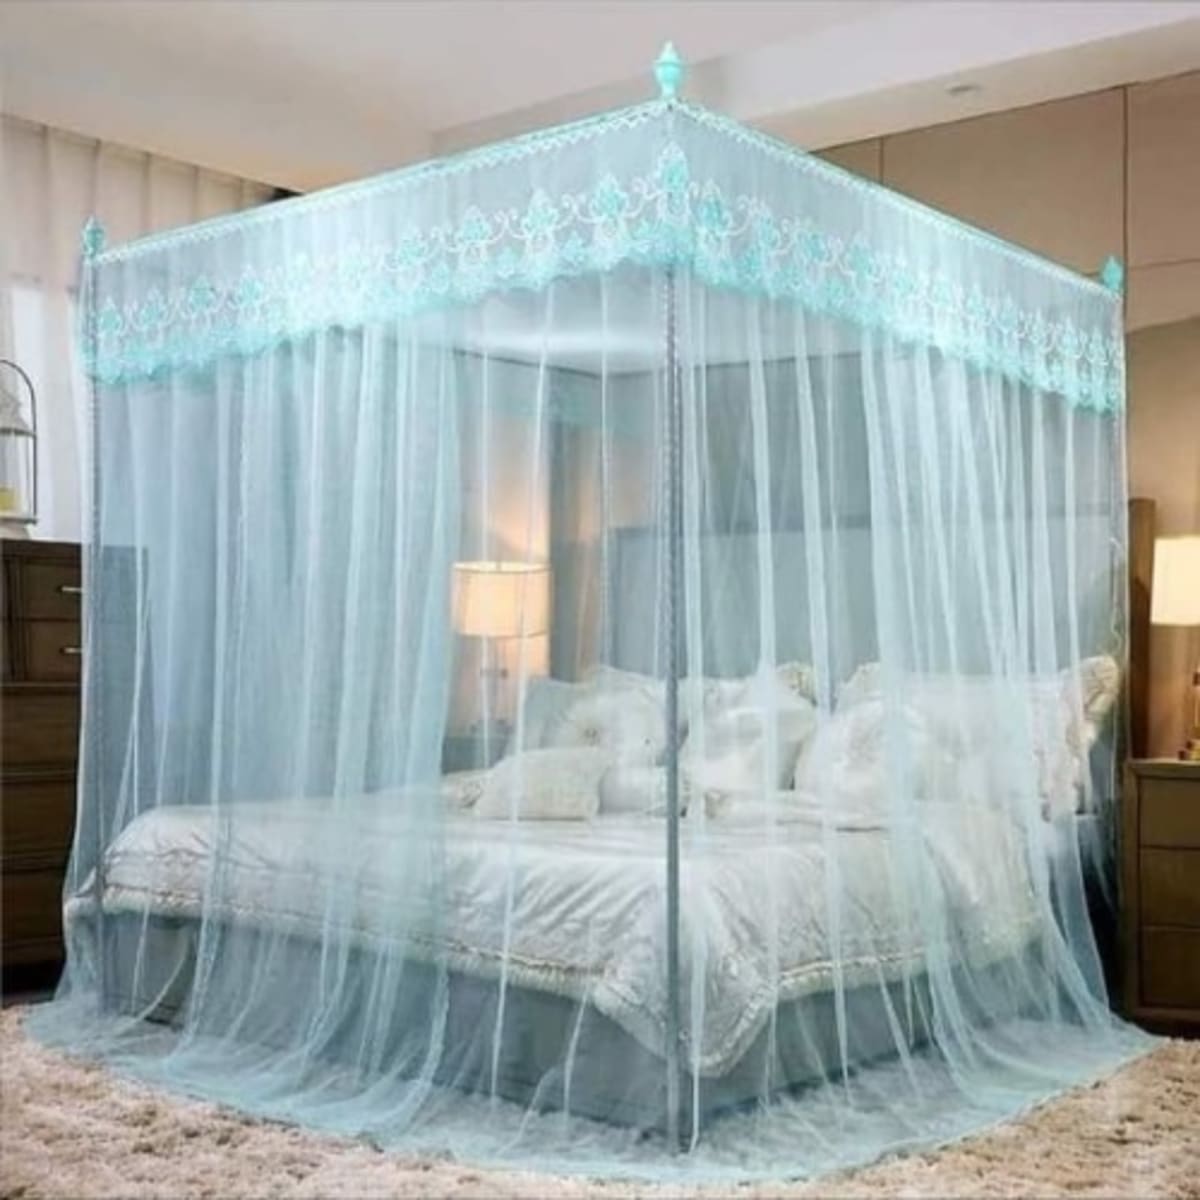 Royal Canopy Mosquito Net- 6Ft By 7Ft